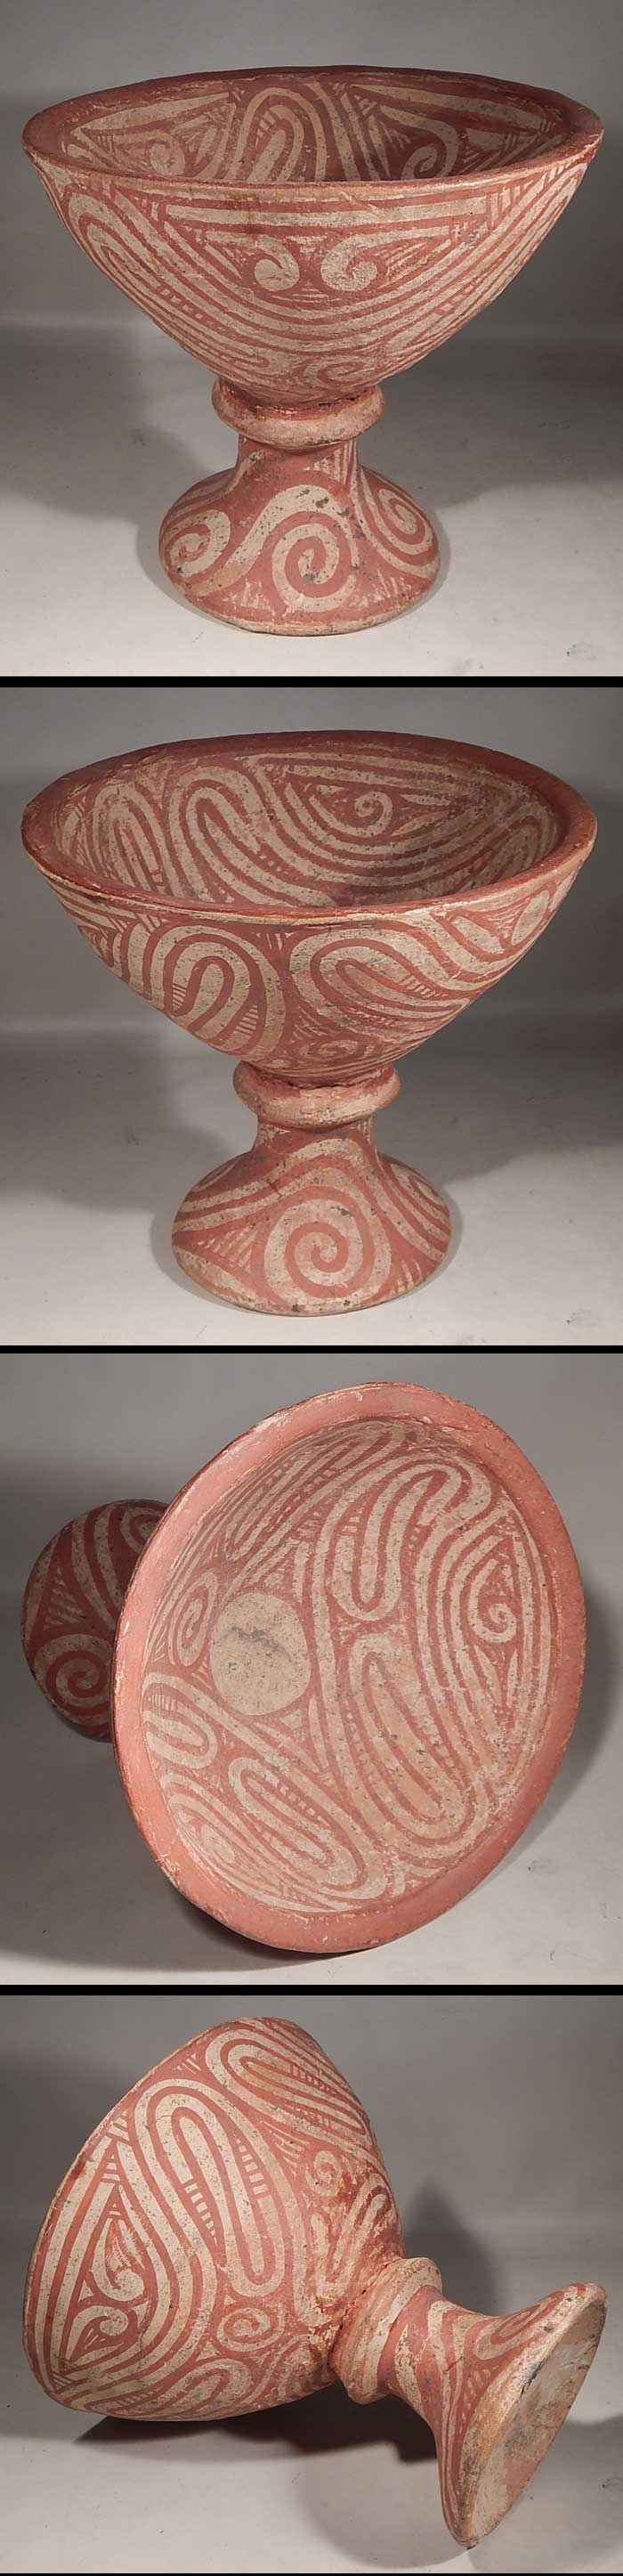 Ancient Thailand Ban Chaing Pottery Chalice Footed Pedestal Bowl Vessel